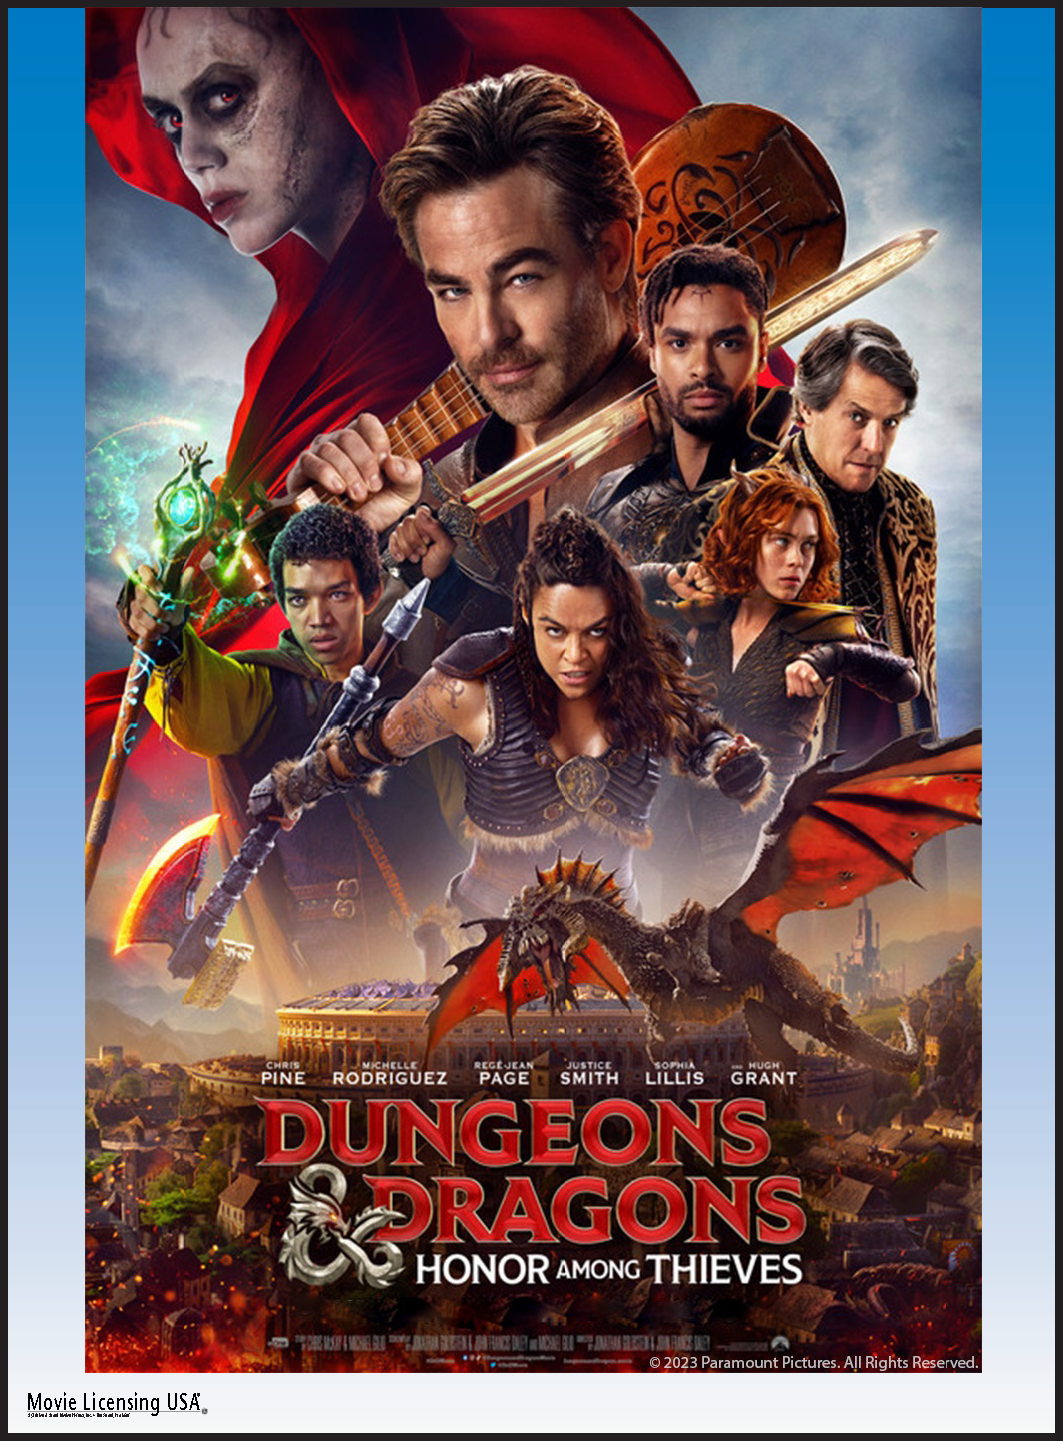 Dungeons & Dragons: Honor Among Theives is Smyrna Public Library's Movie Matinee, playing March 2 at 2pm